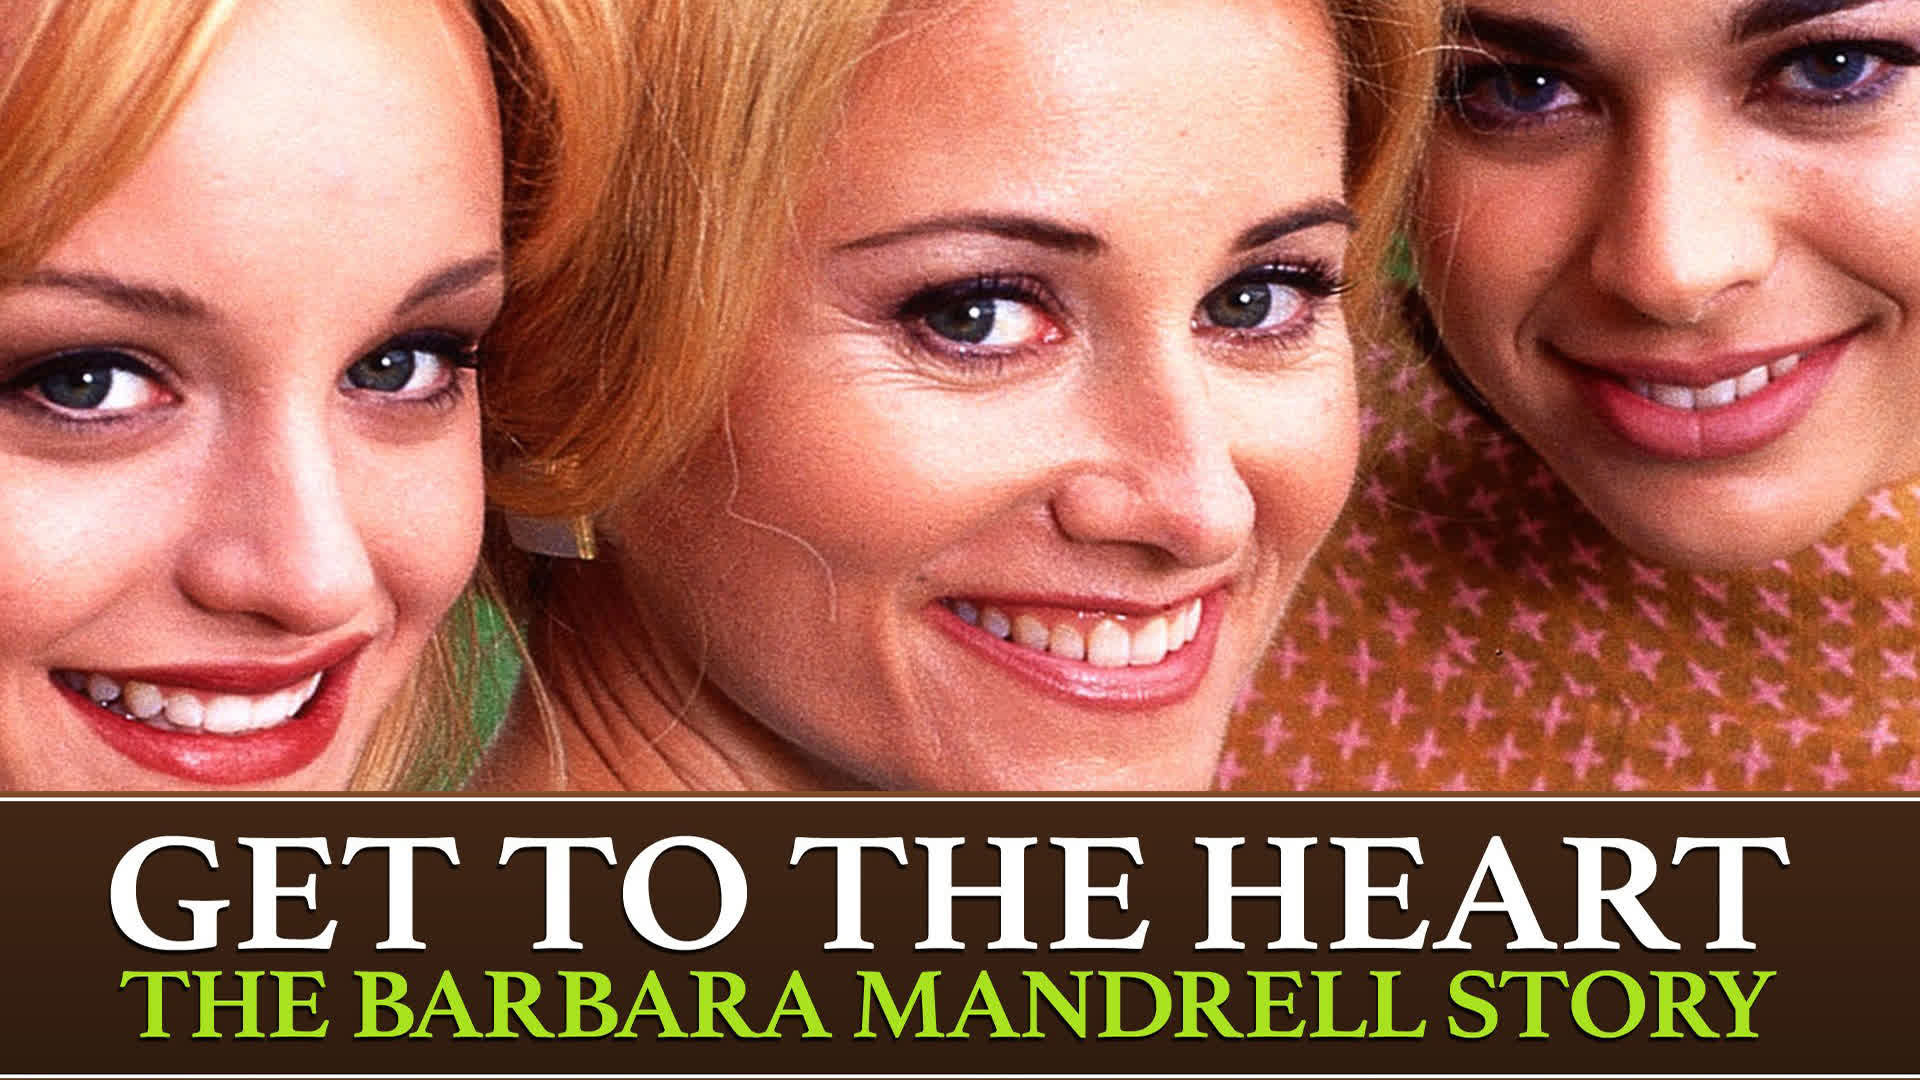 Get to the Heart: The Barbara Mandrell Story